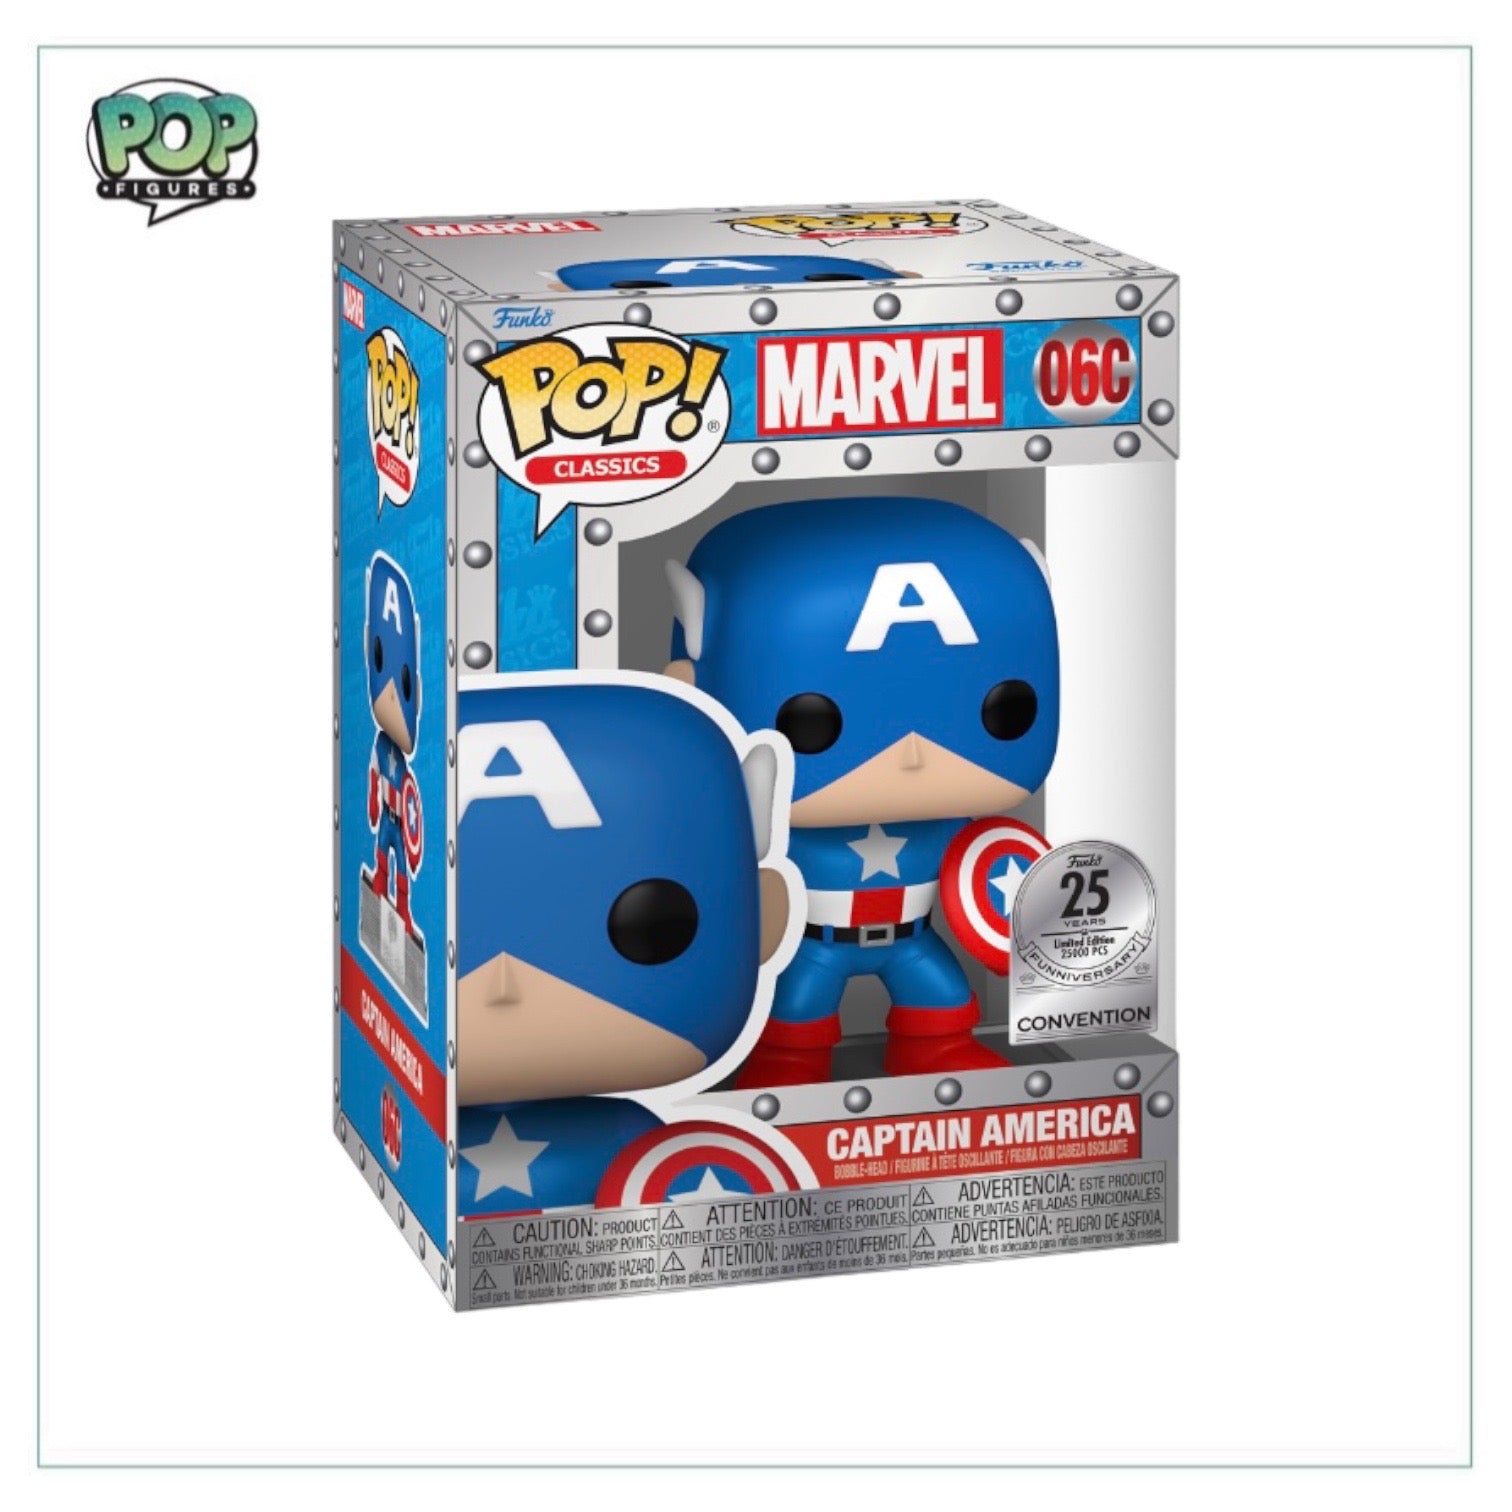 Captain America 25th Anniversary Funko Pop Classics! - Marvel - NYCC 2023 Shared Exclusive LE25000 Pcs - Sealed